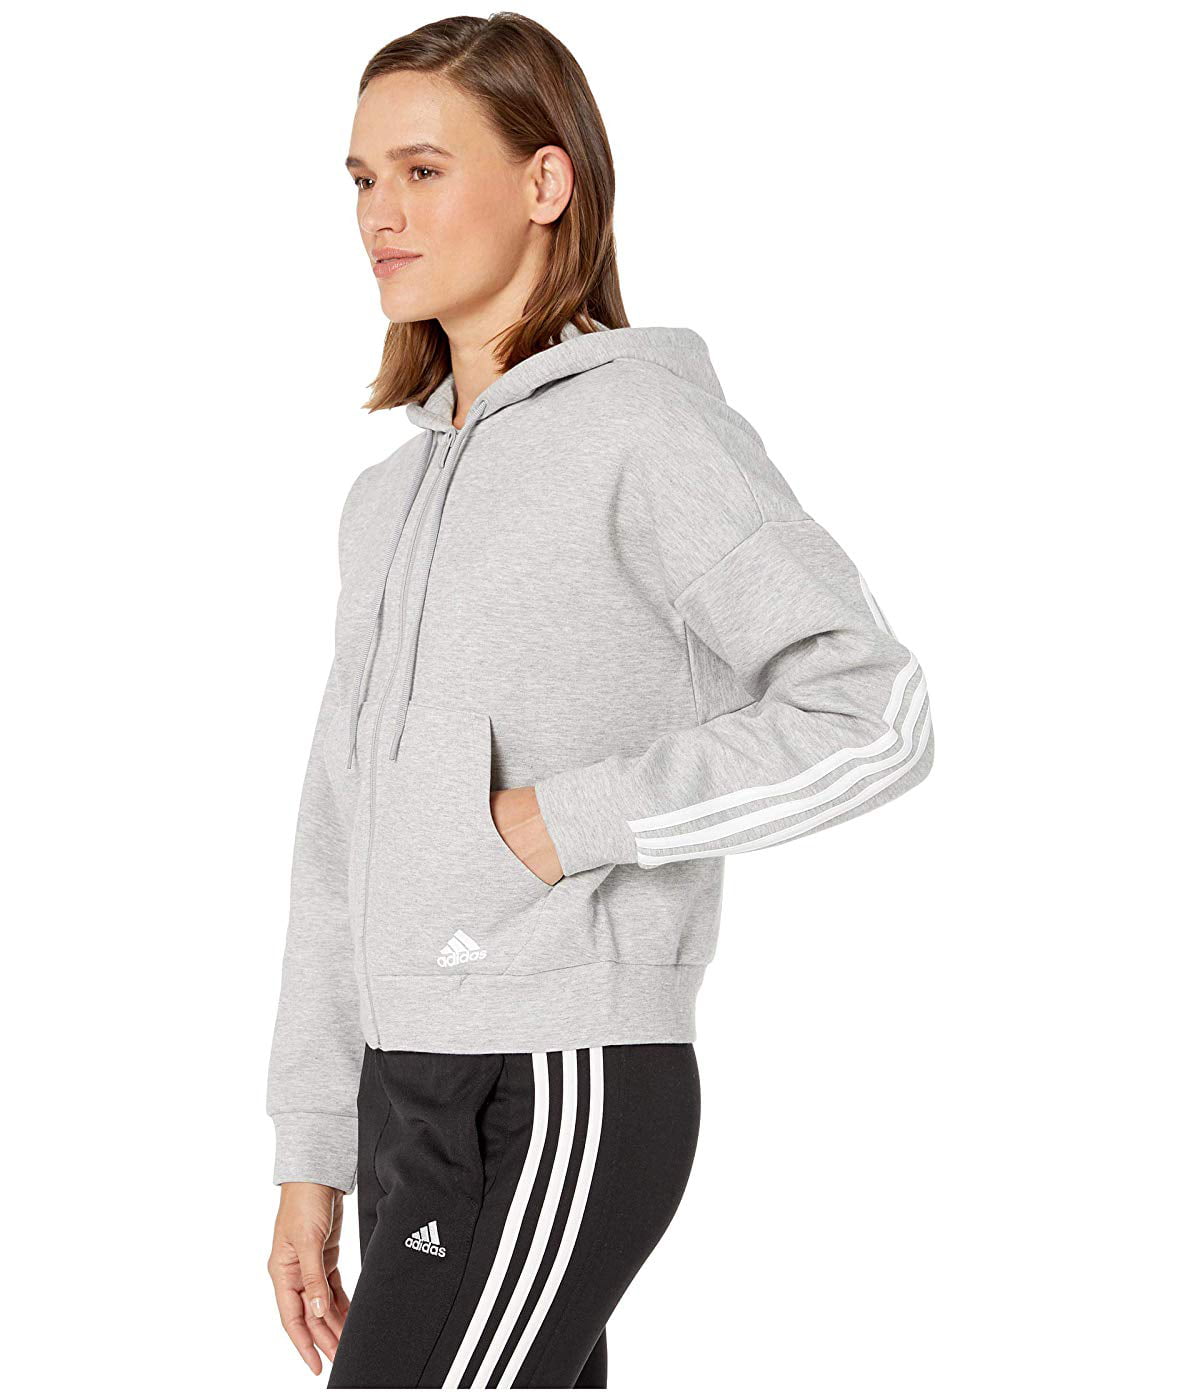 Medium Double Zip Have Heather/White Hoodie Knit adidas Must Grey Full